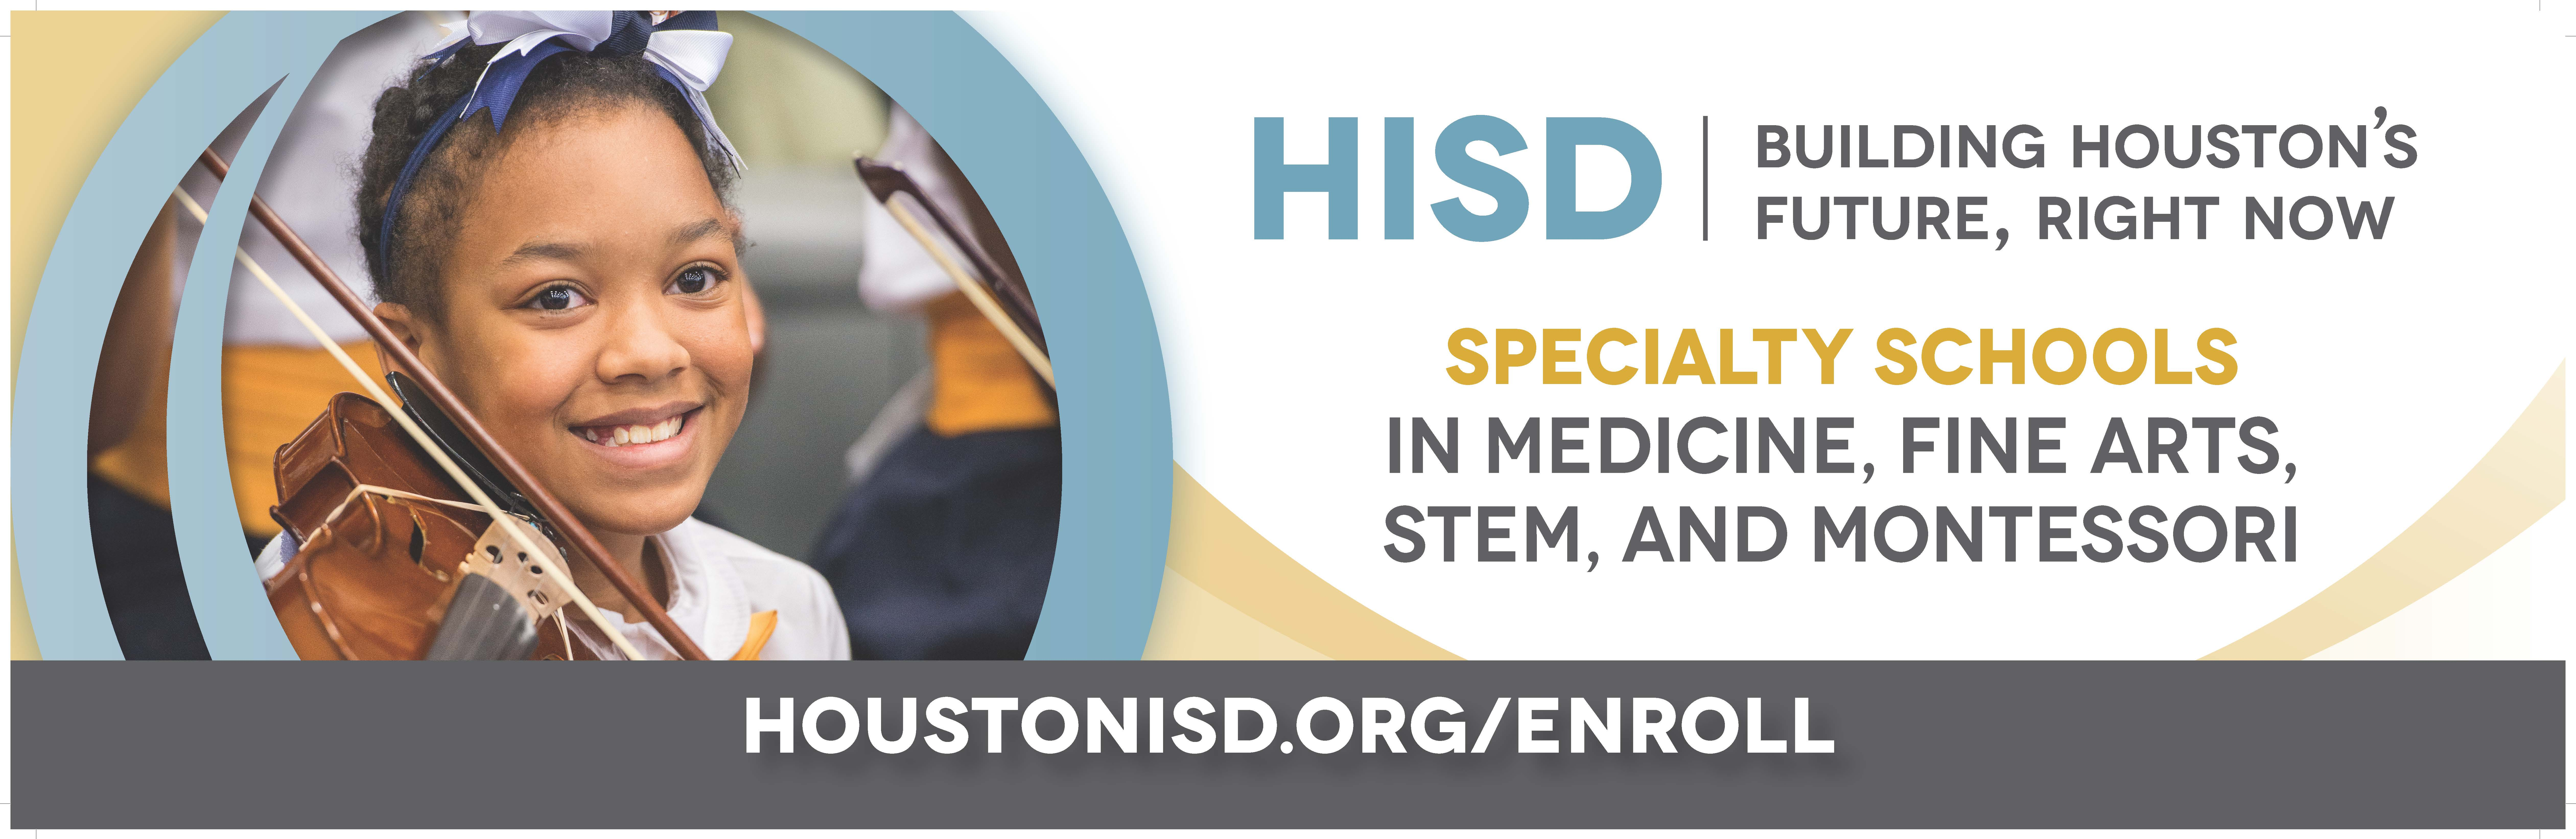 HISD Logo - HISD launches new logo and tagline across the city | News Blog